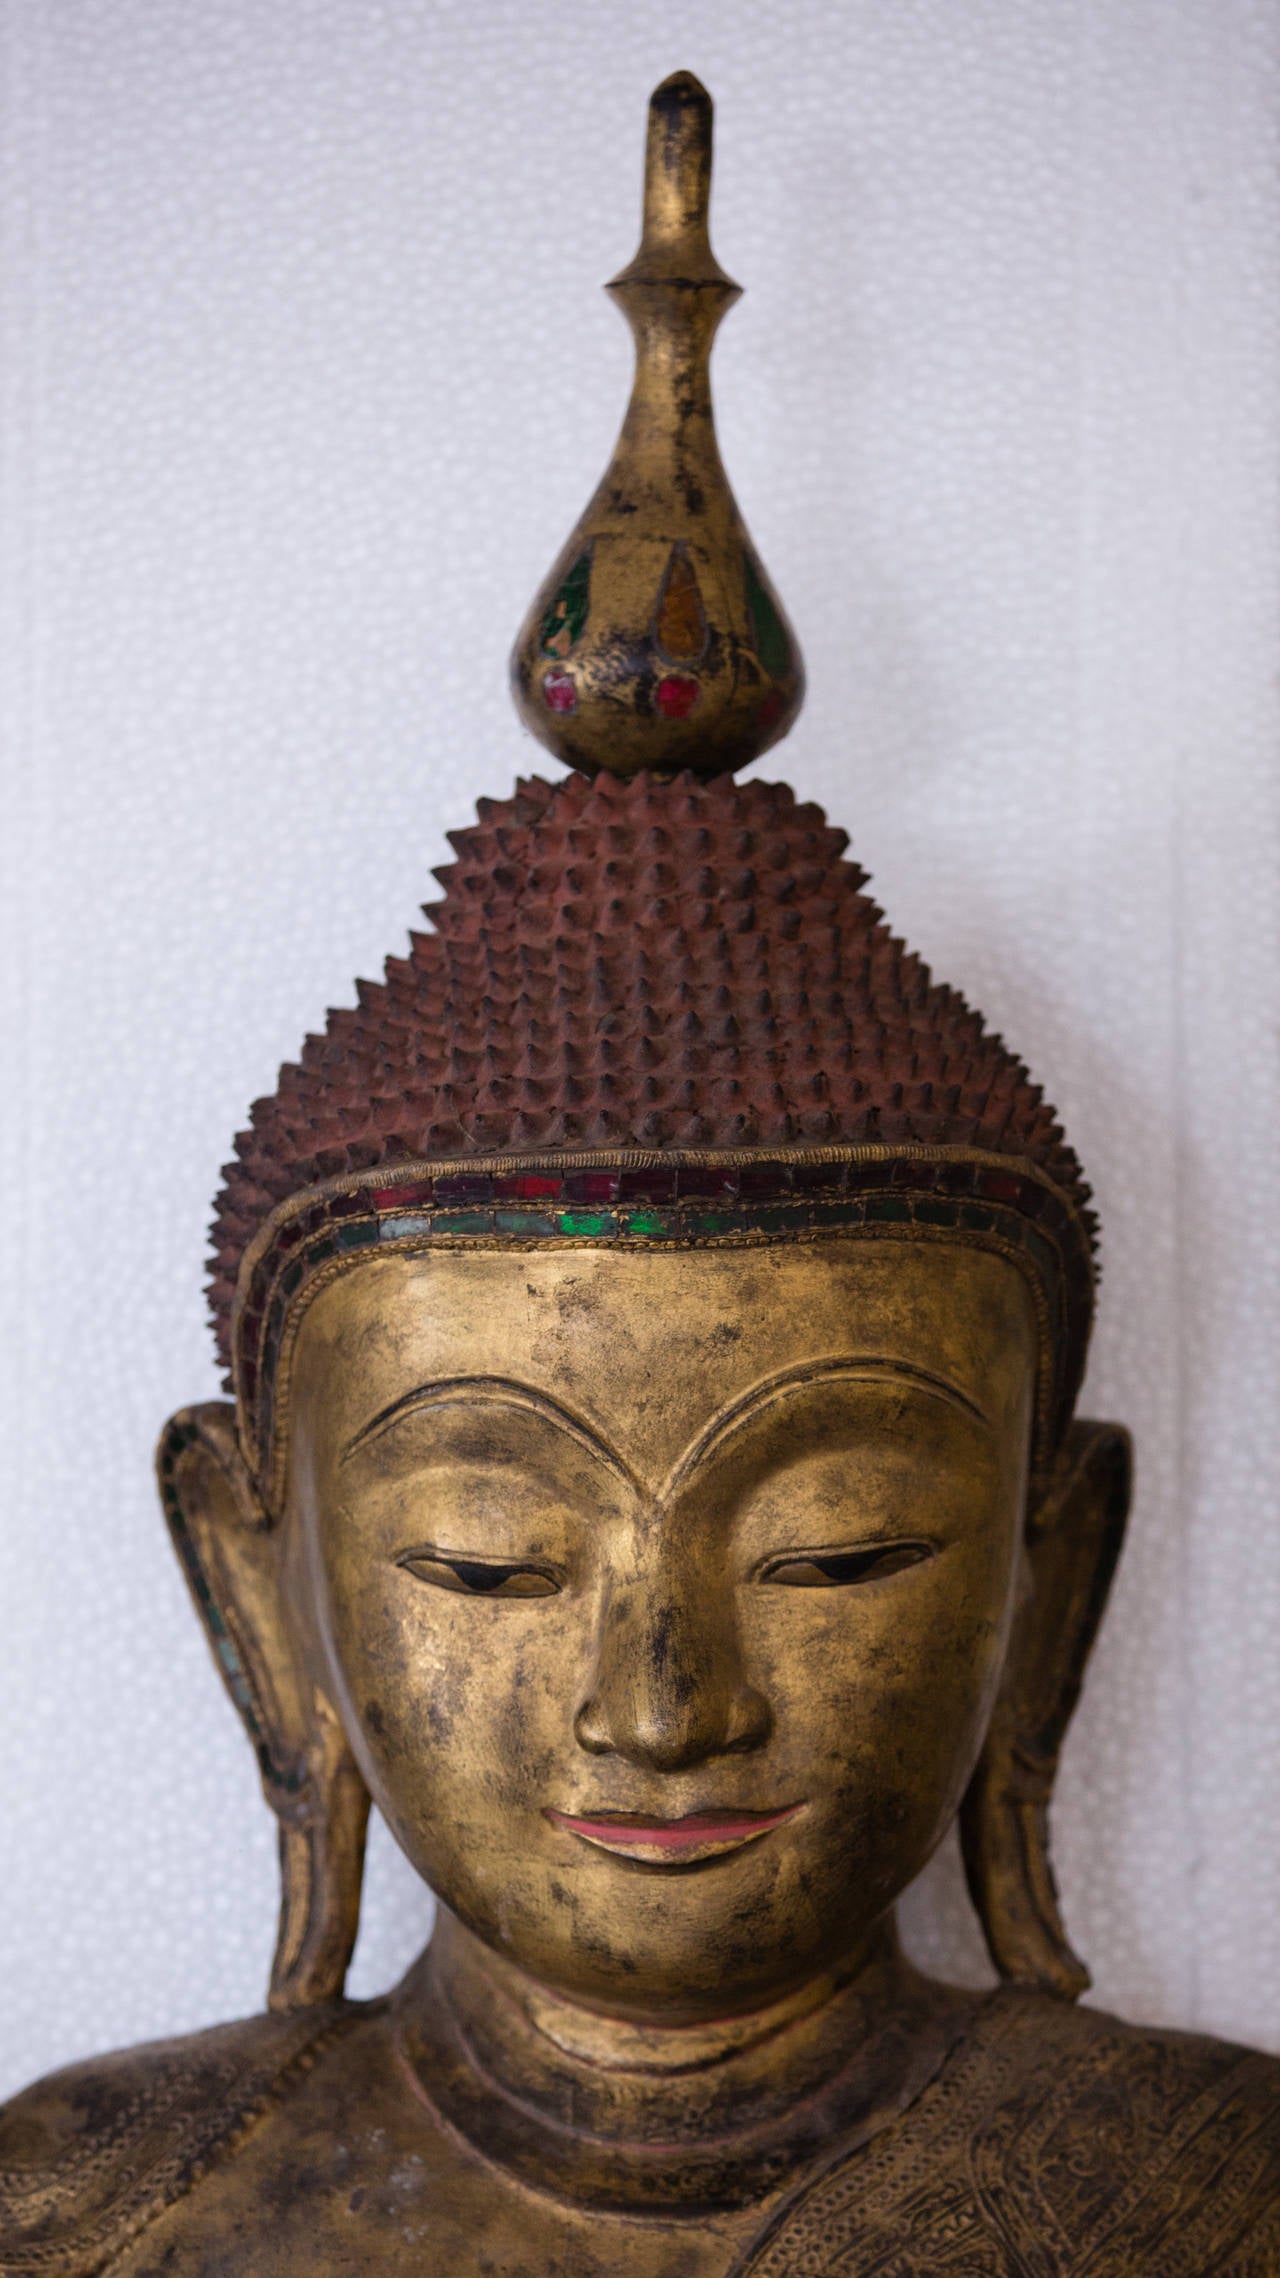 Burma, a monumental seated Buddha, 67” high and 43” wide, late 19th century. 

The monumental seated effigy of the Buddha in Shan style posed in Dhyanasana with attached praying attendants and carved of gold gilded dry lacquer over wood seated atop